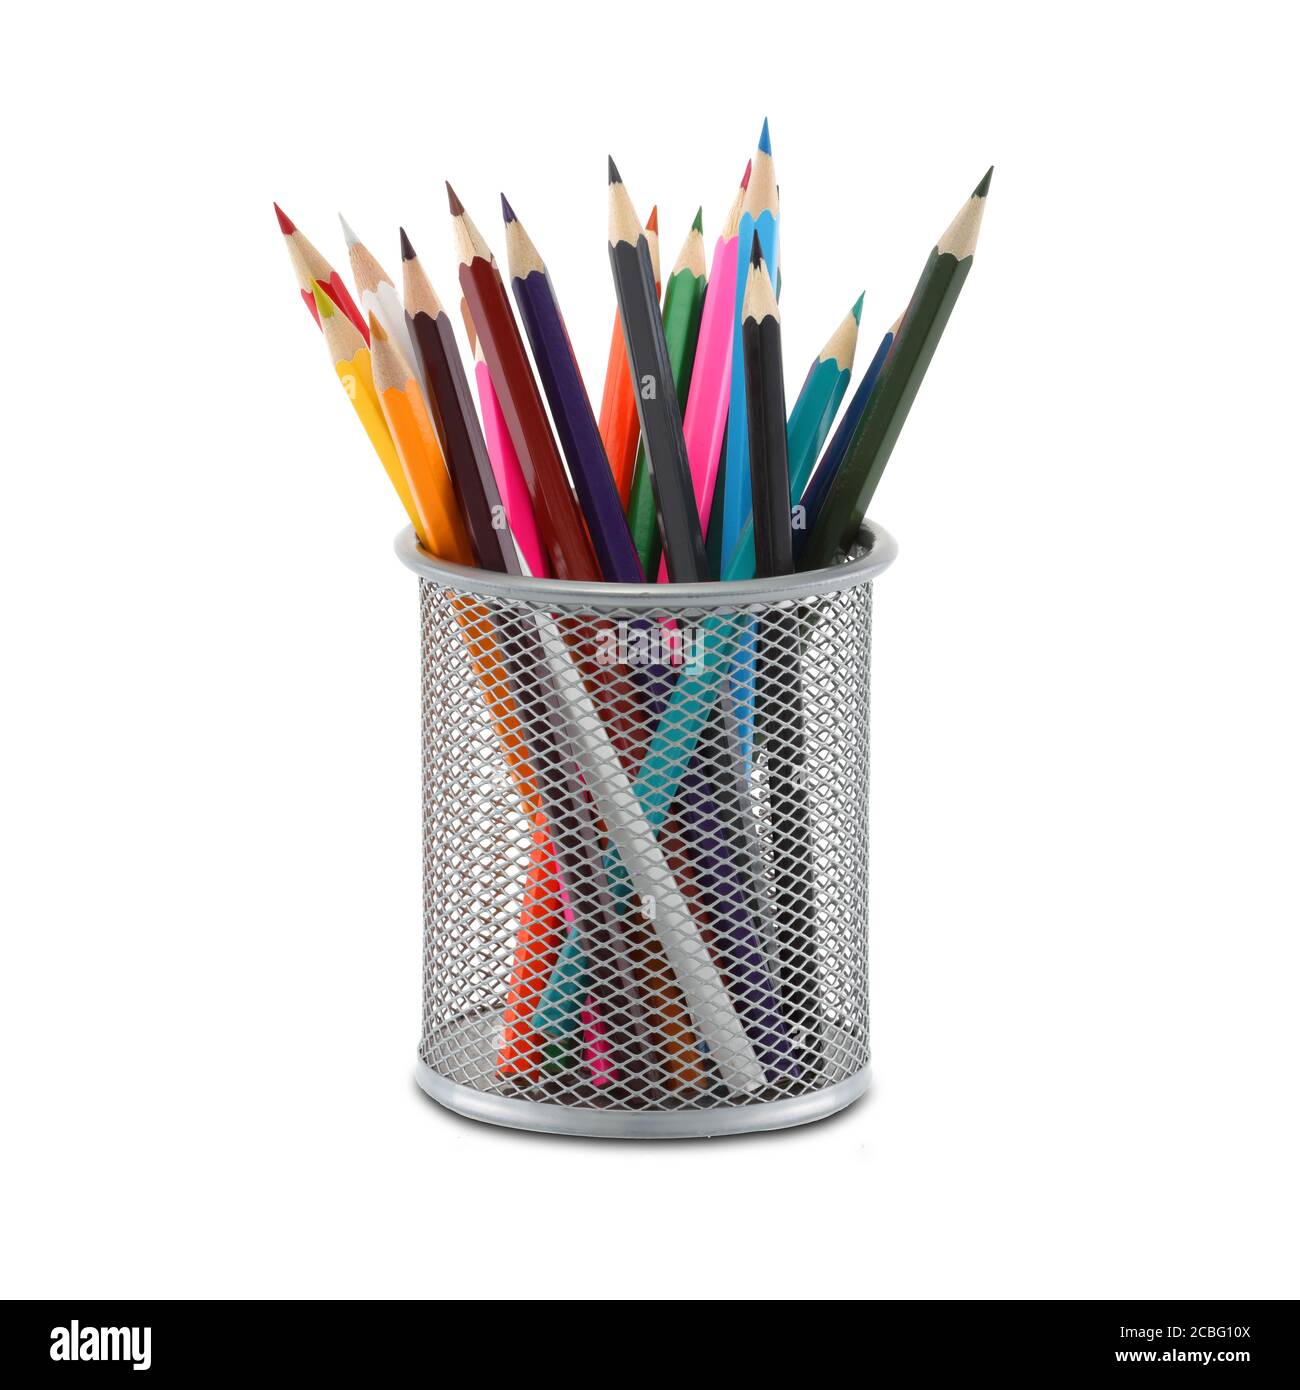 Desk tidy with colored pencils on white Stock Photo